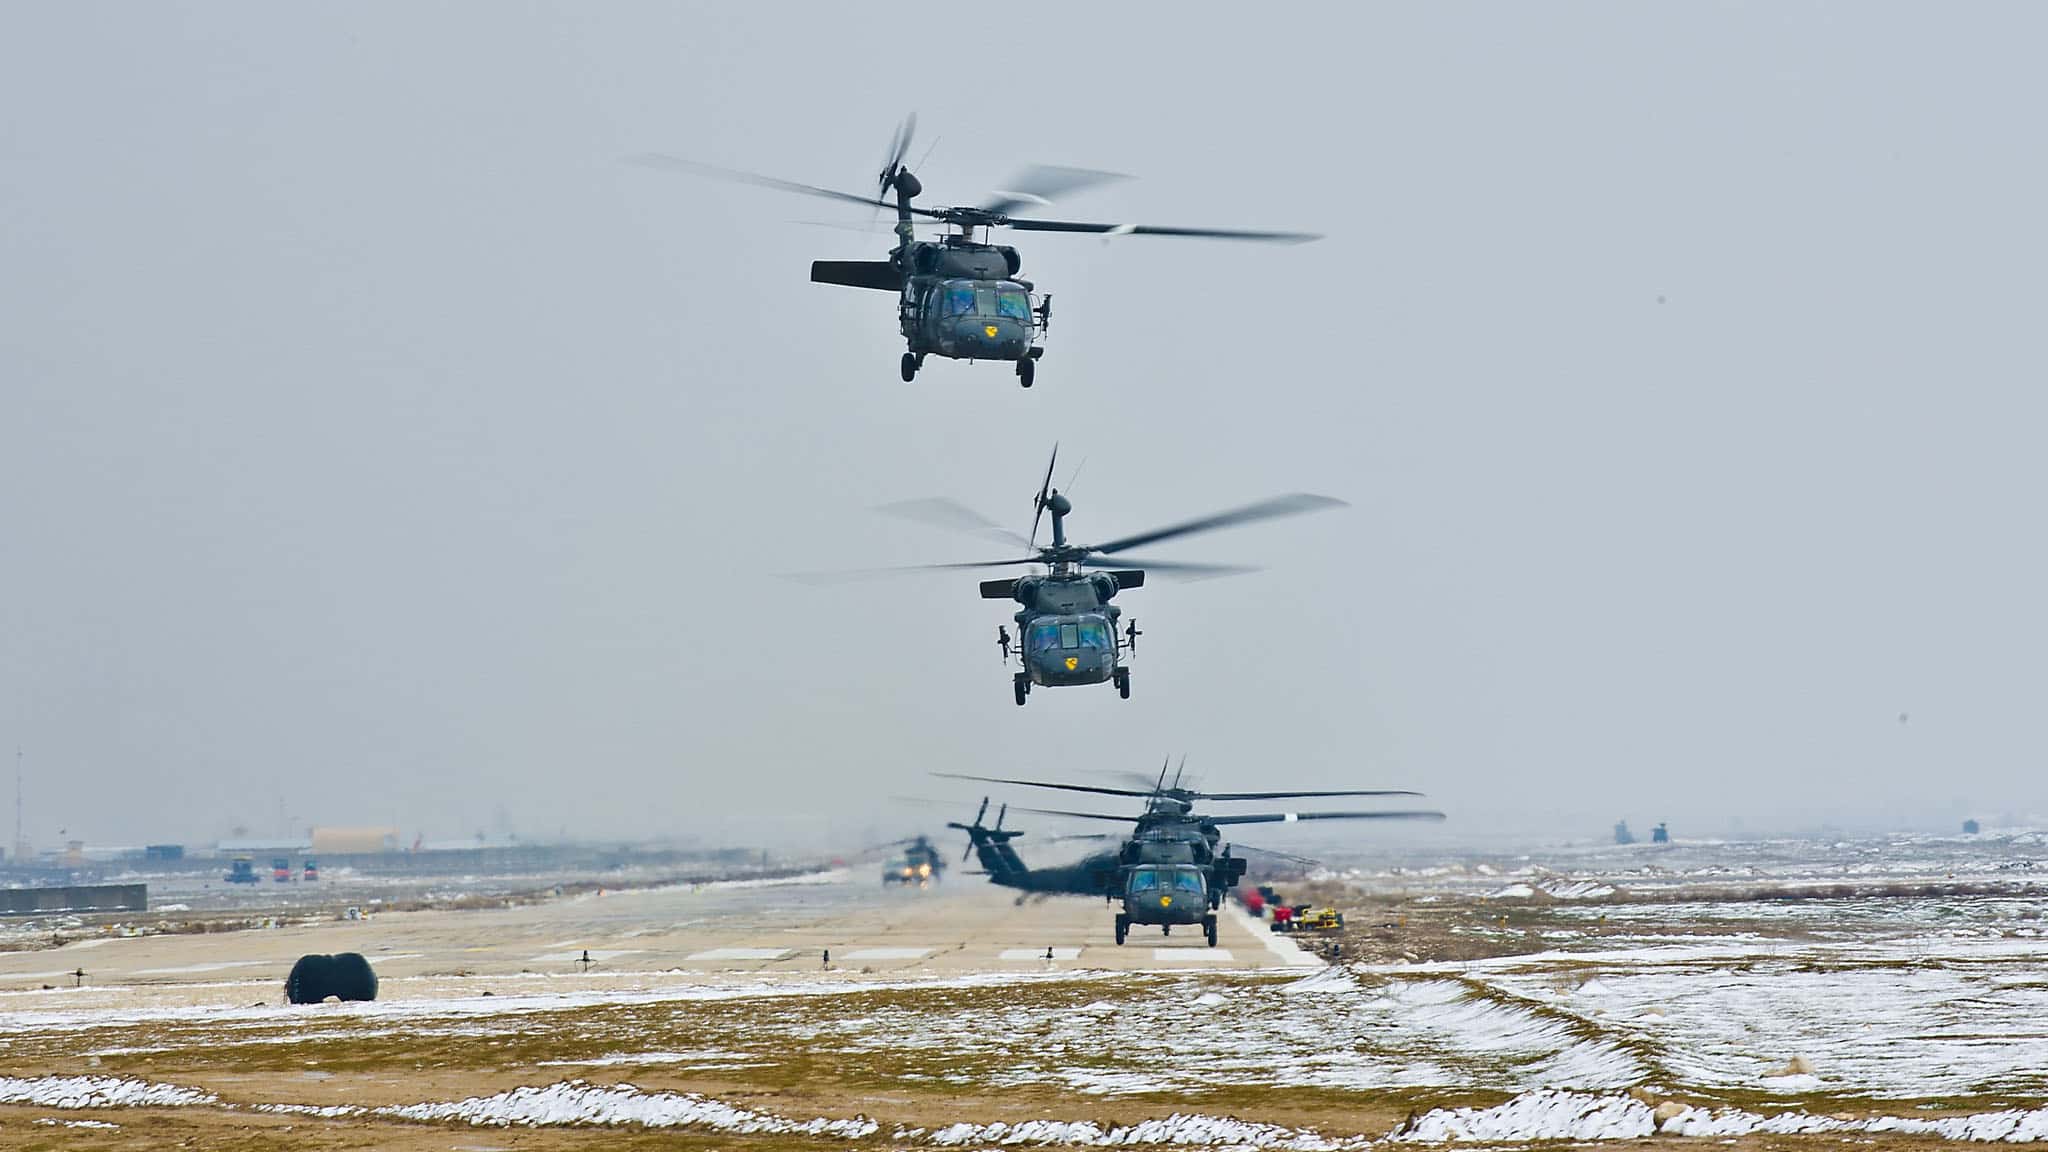 Several military helicopters take off in formation from an airbase.